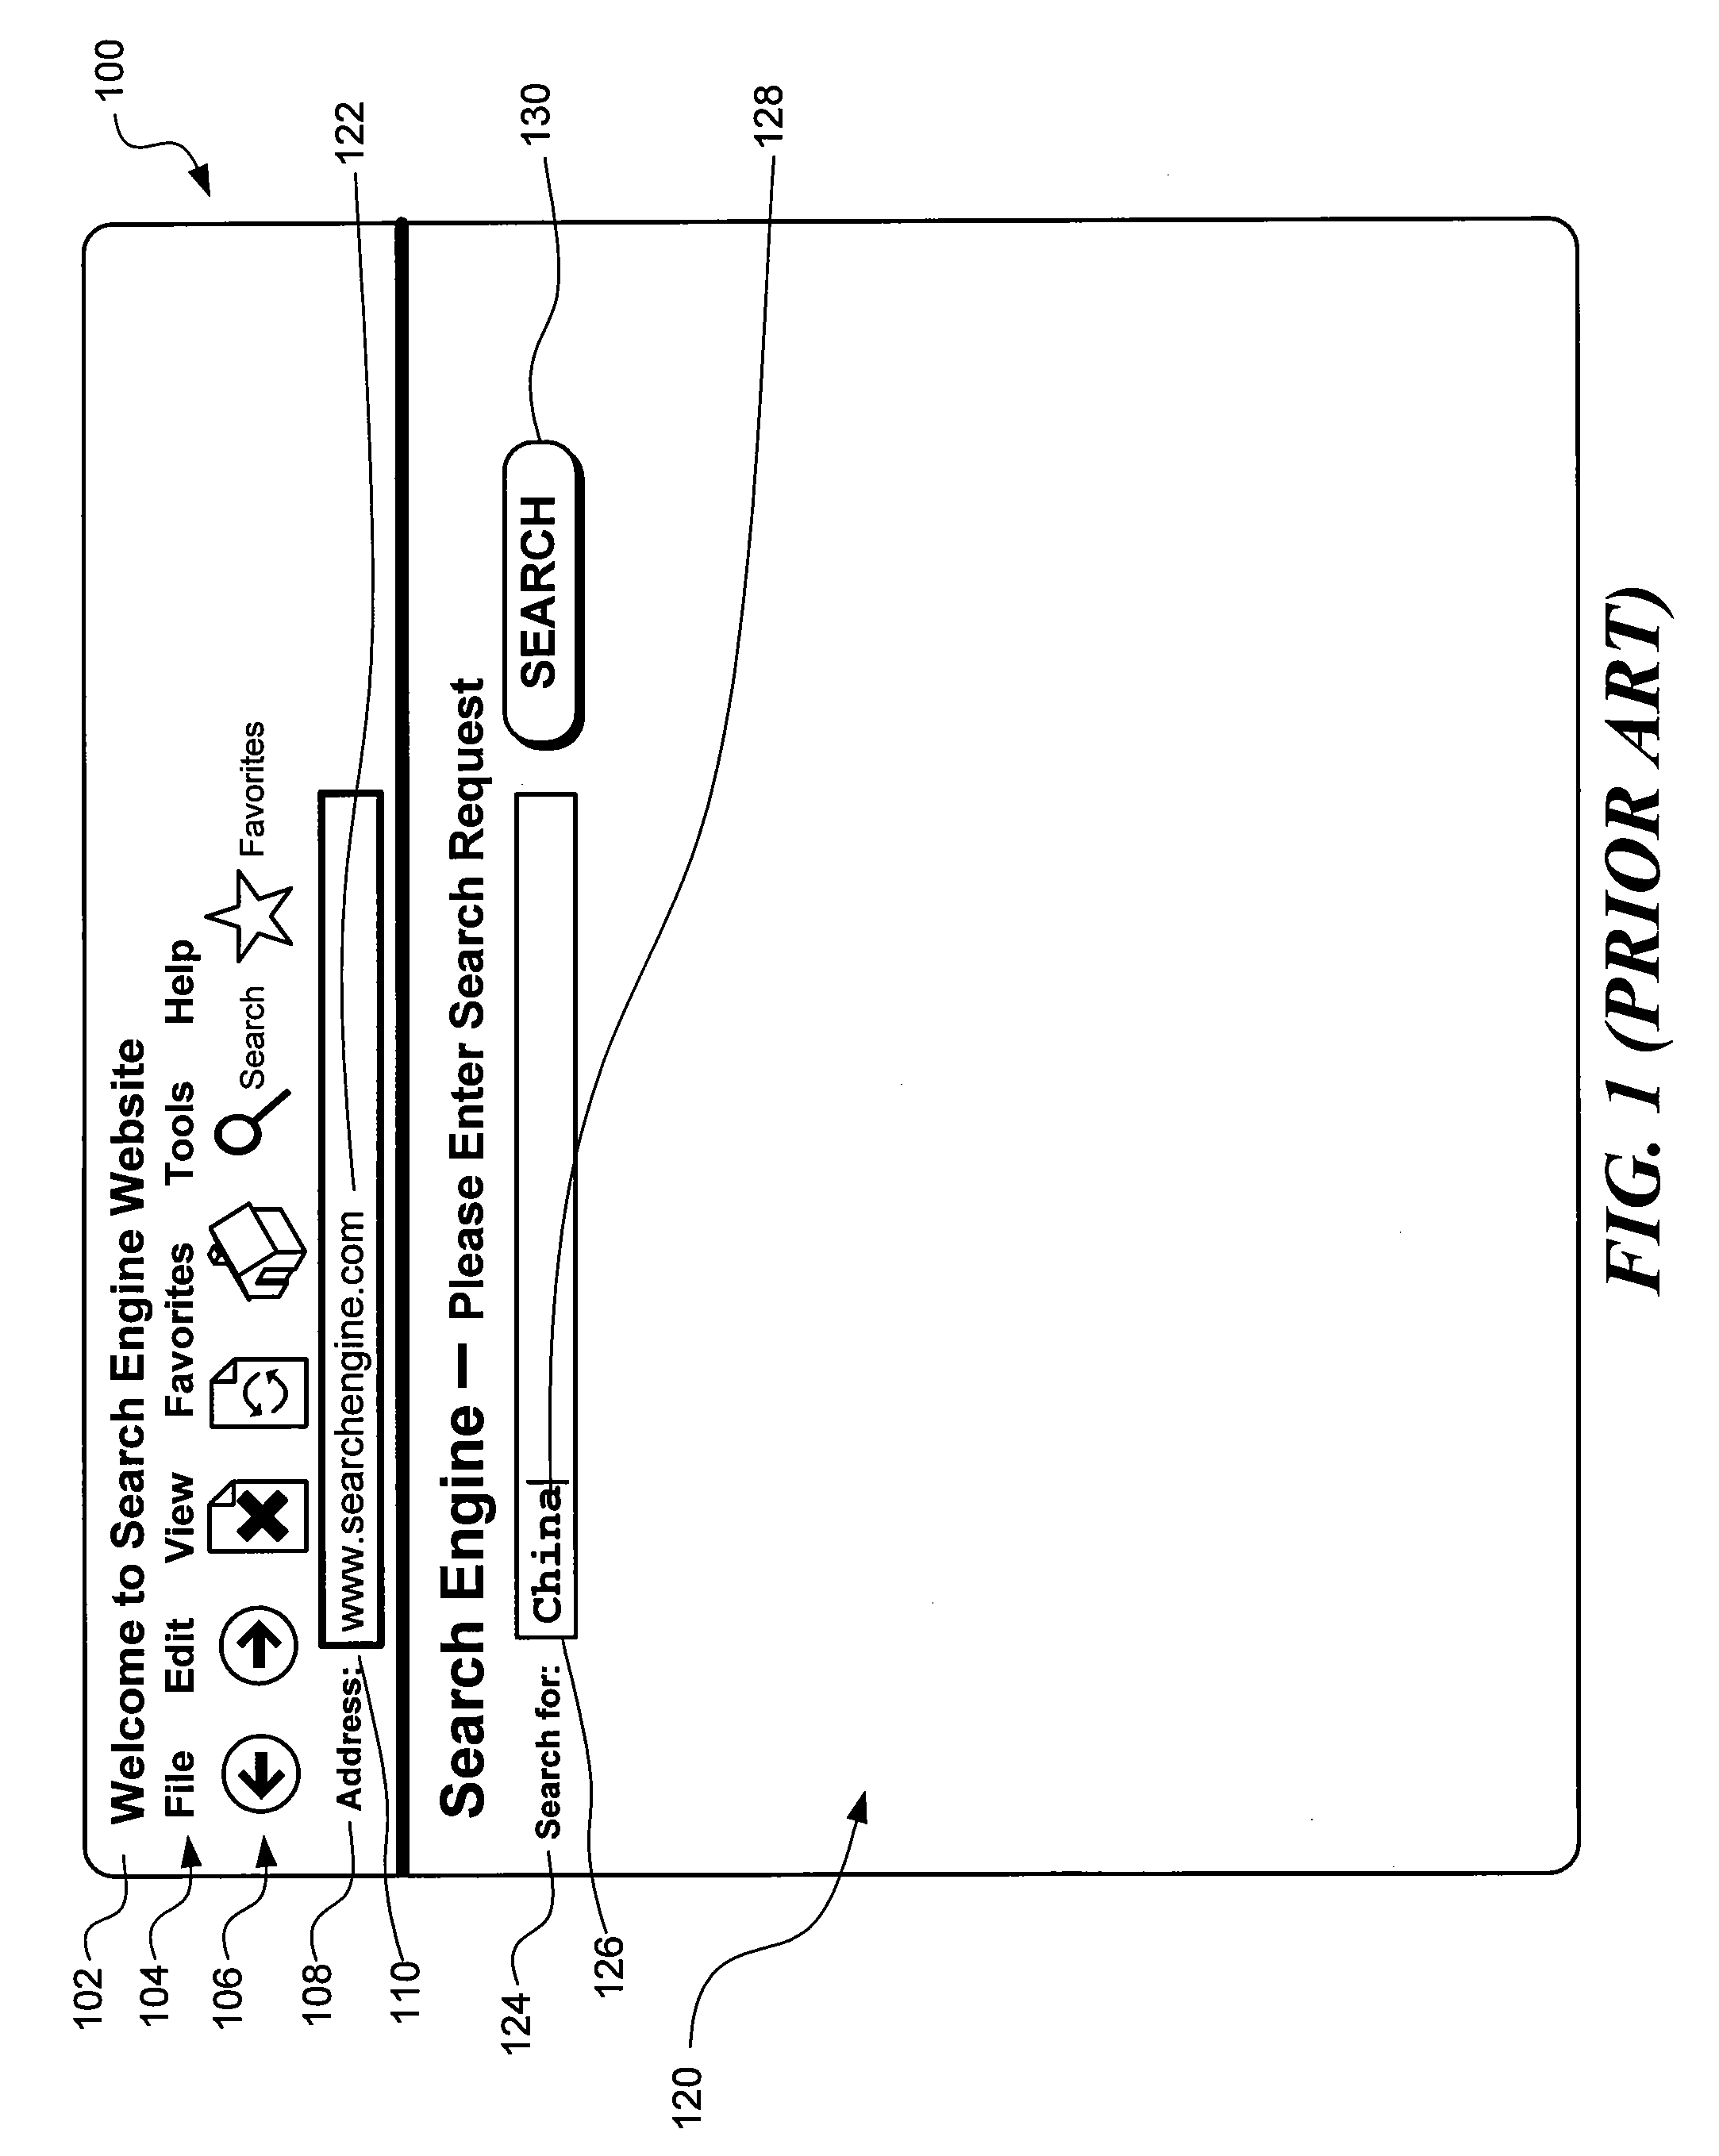 Method and system for adaptive categorial presentation of search results